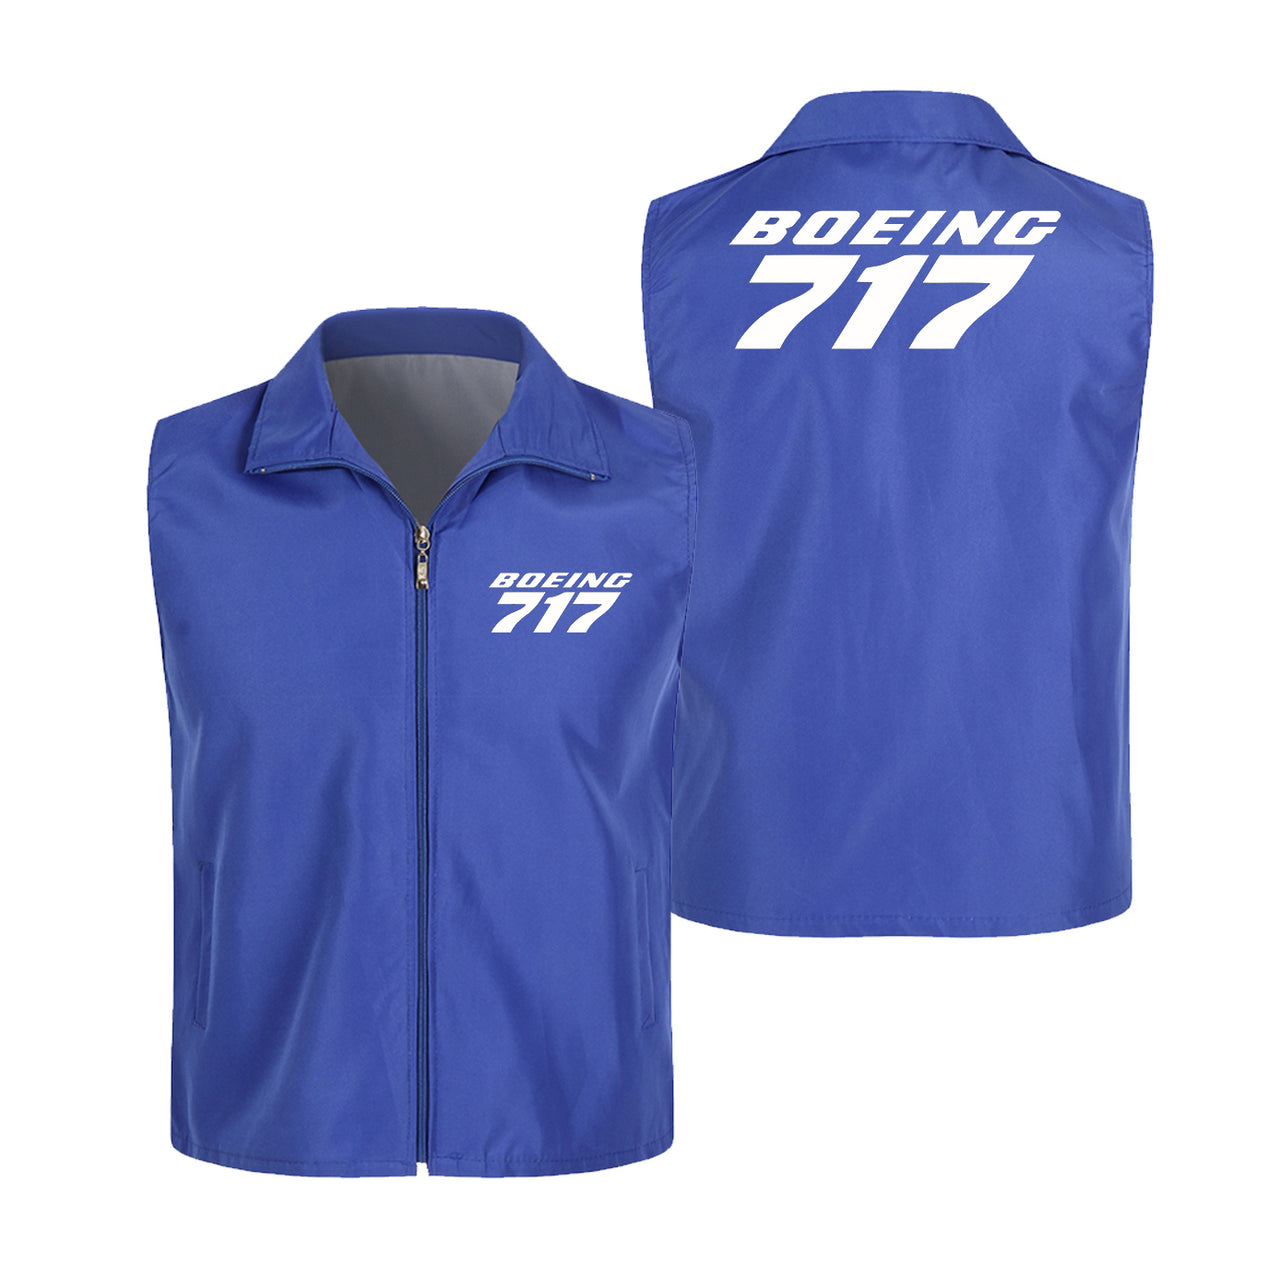 Boeing 717 & Text Designed Thin Style Vests